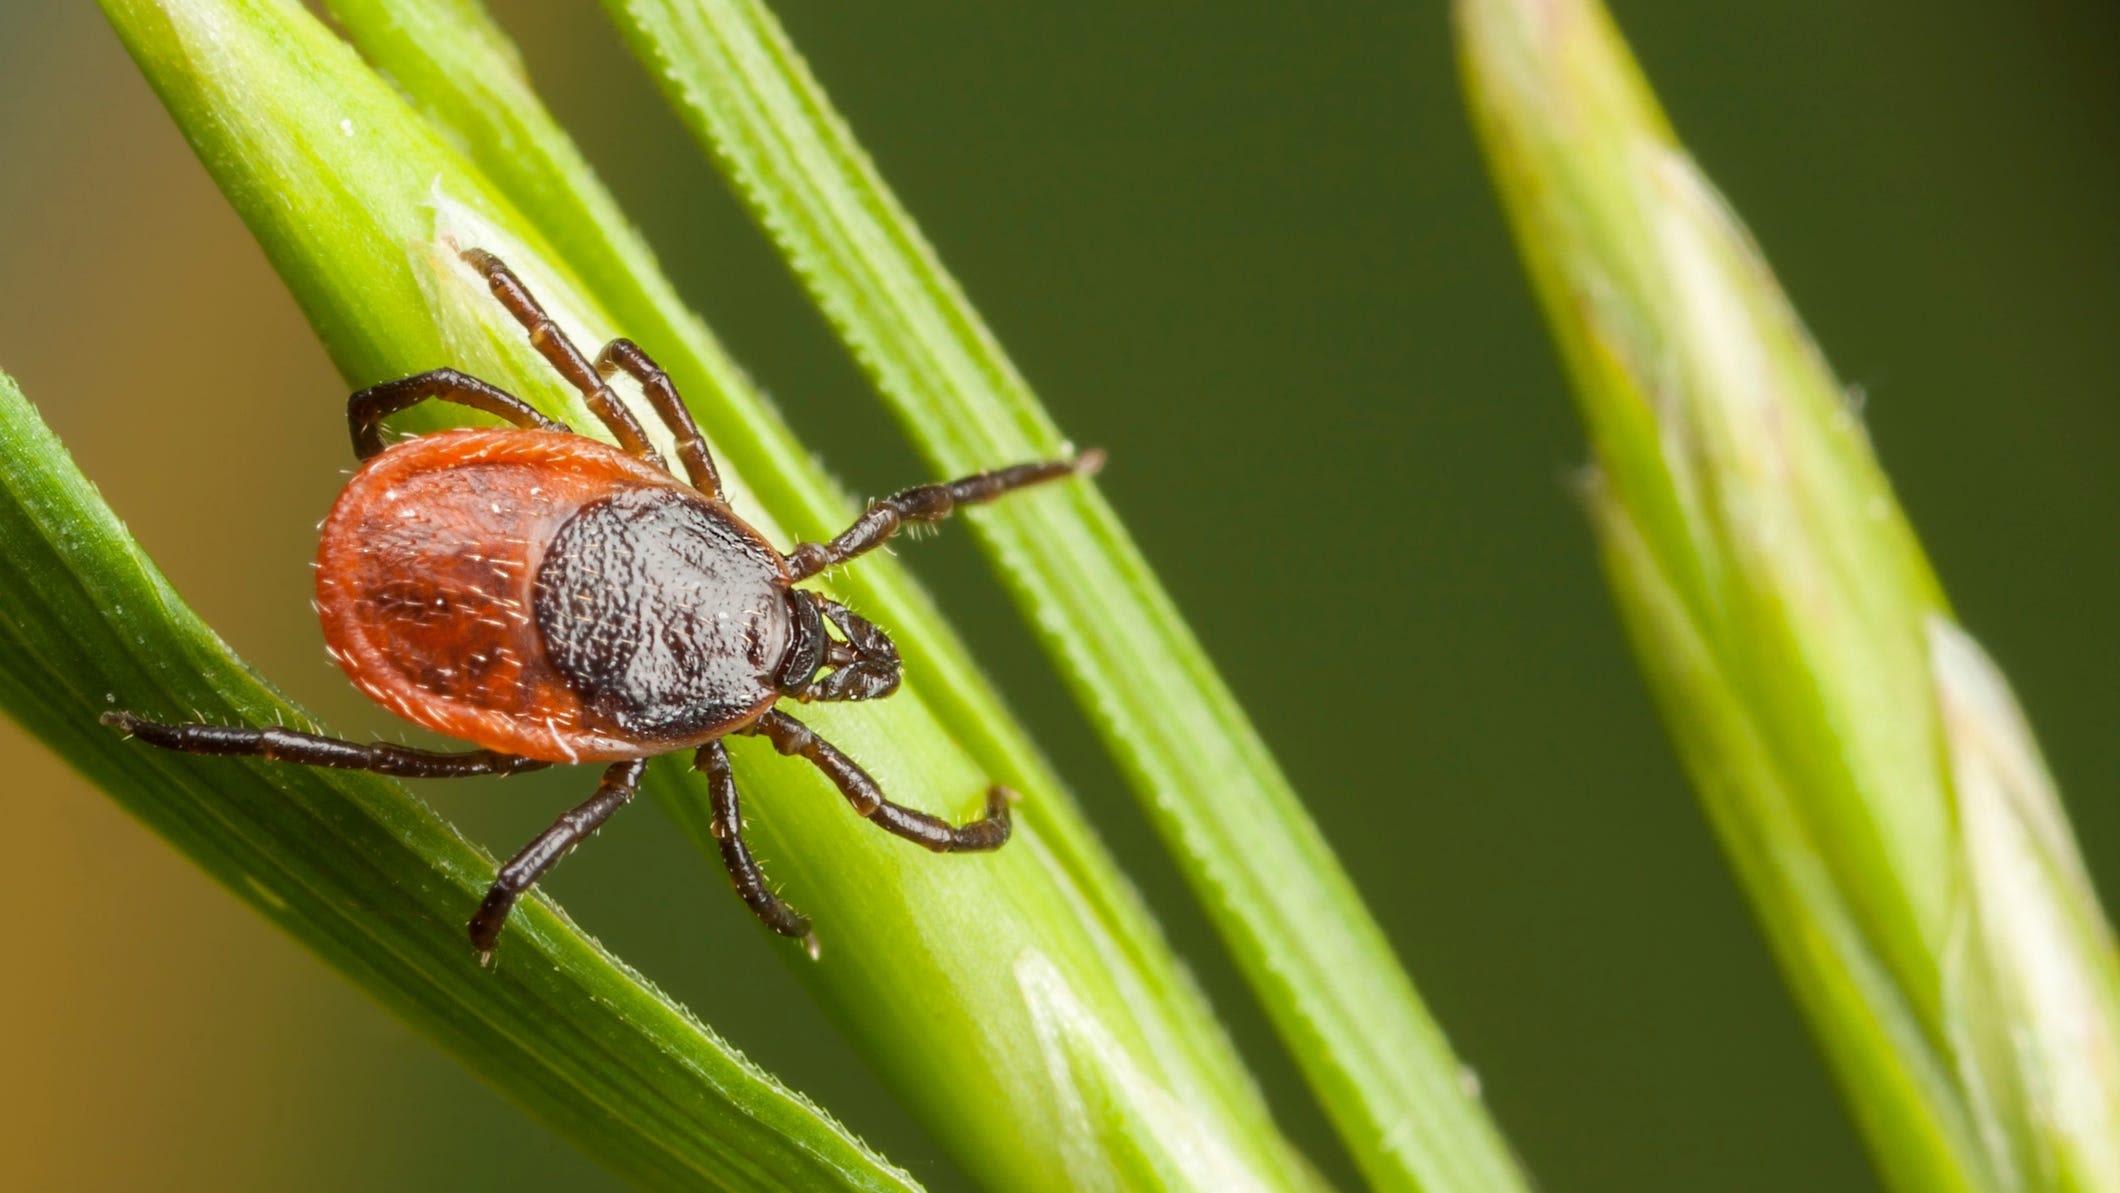 It's tick season: What types live in your area and how to keep them under control